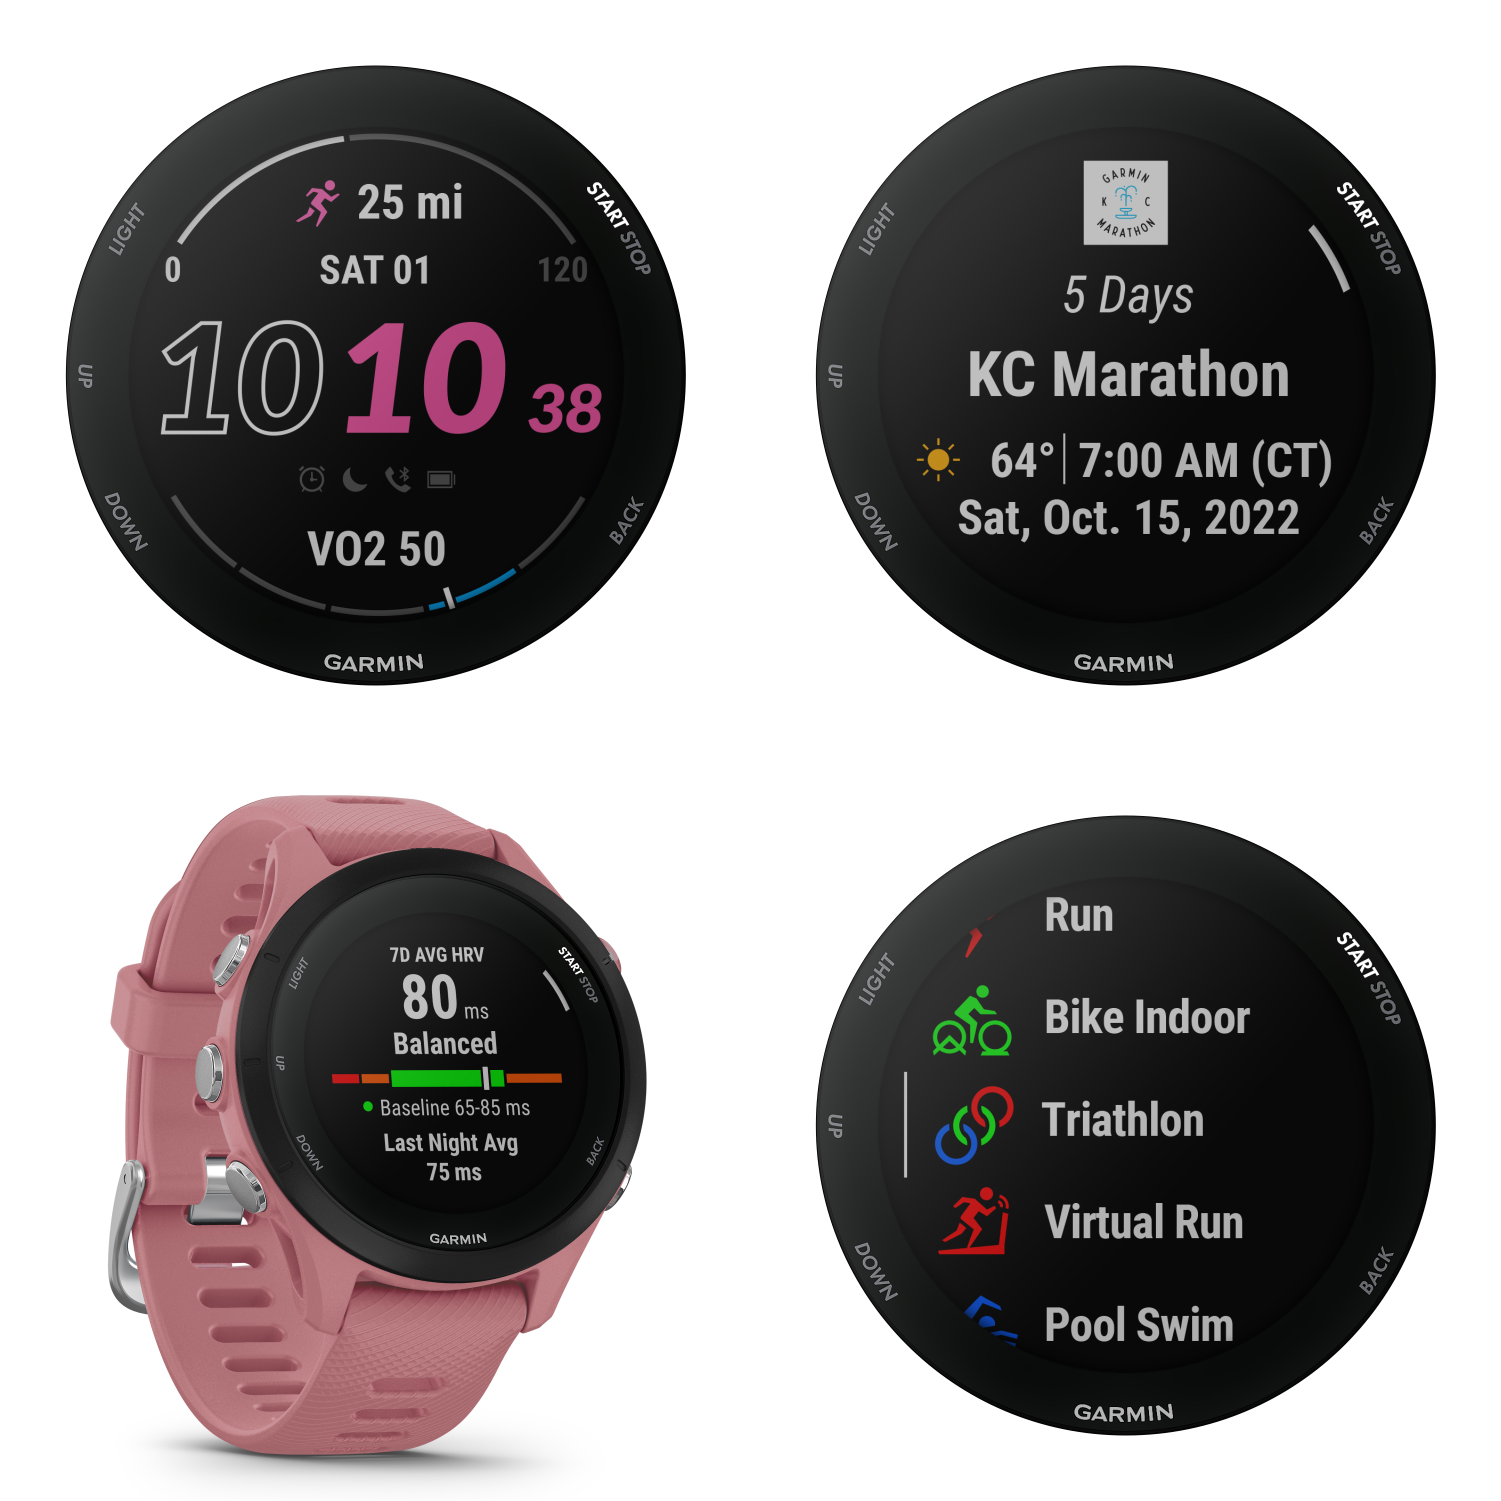 Guide: Garmin Forerunner 255 music - GPS watch review and features 